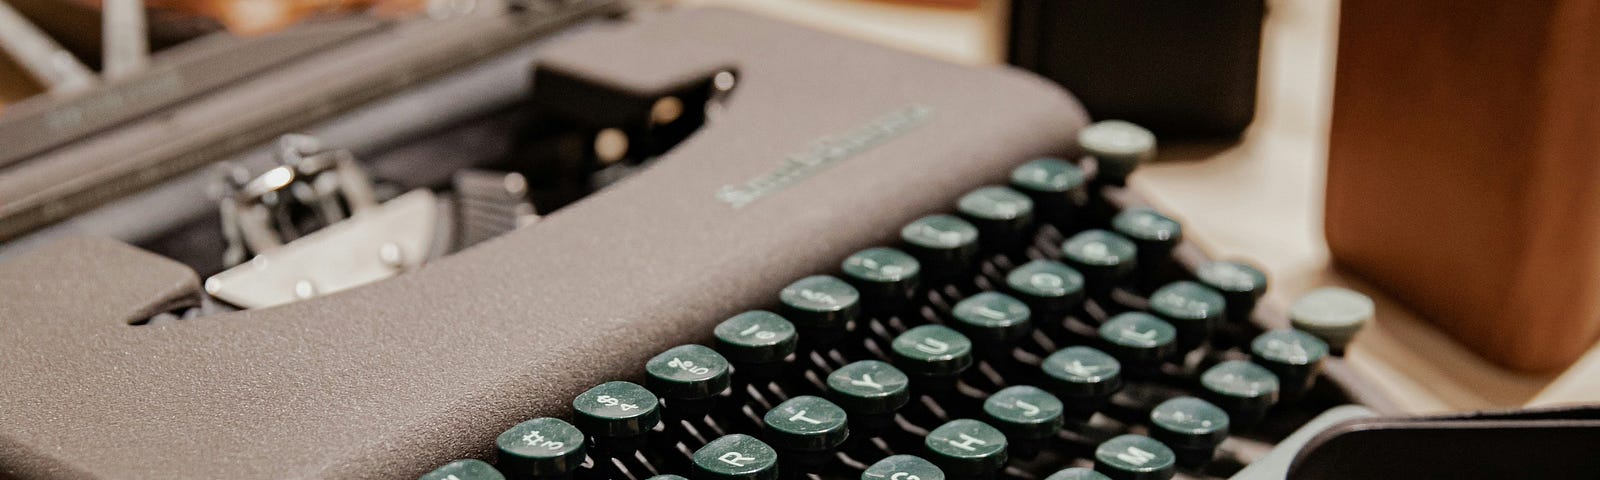 Why are there blocks of wood surrounding this typewriter? This better not be a joke on us the readers…